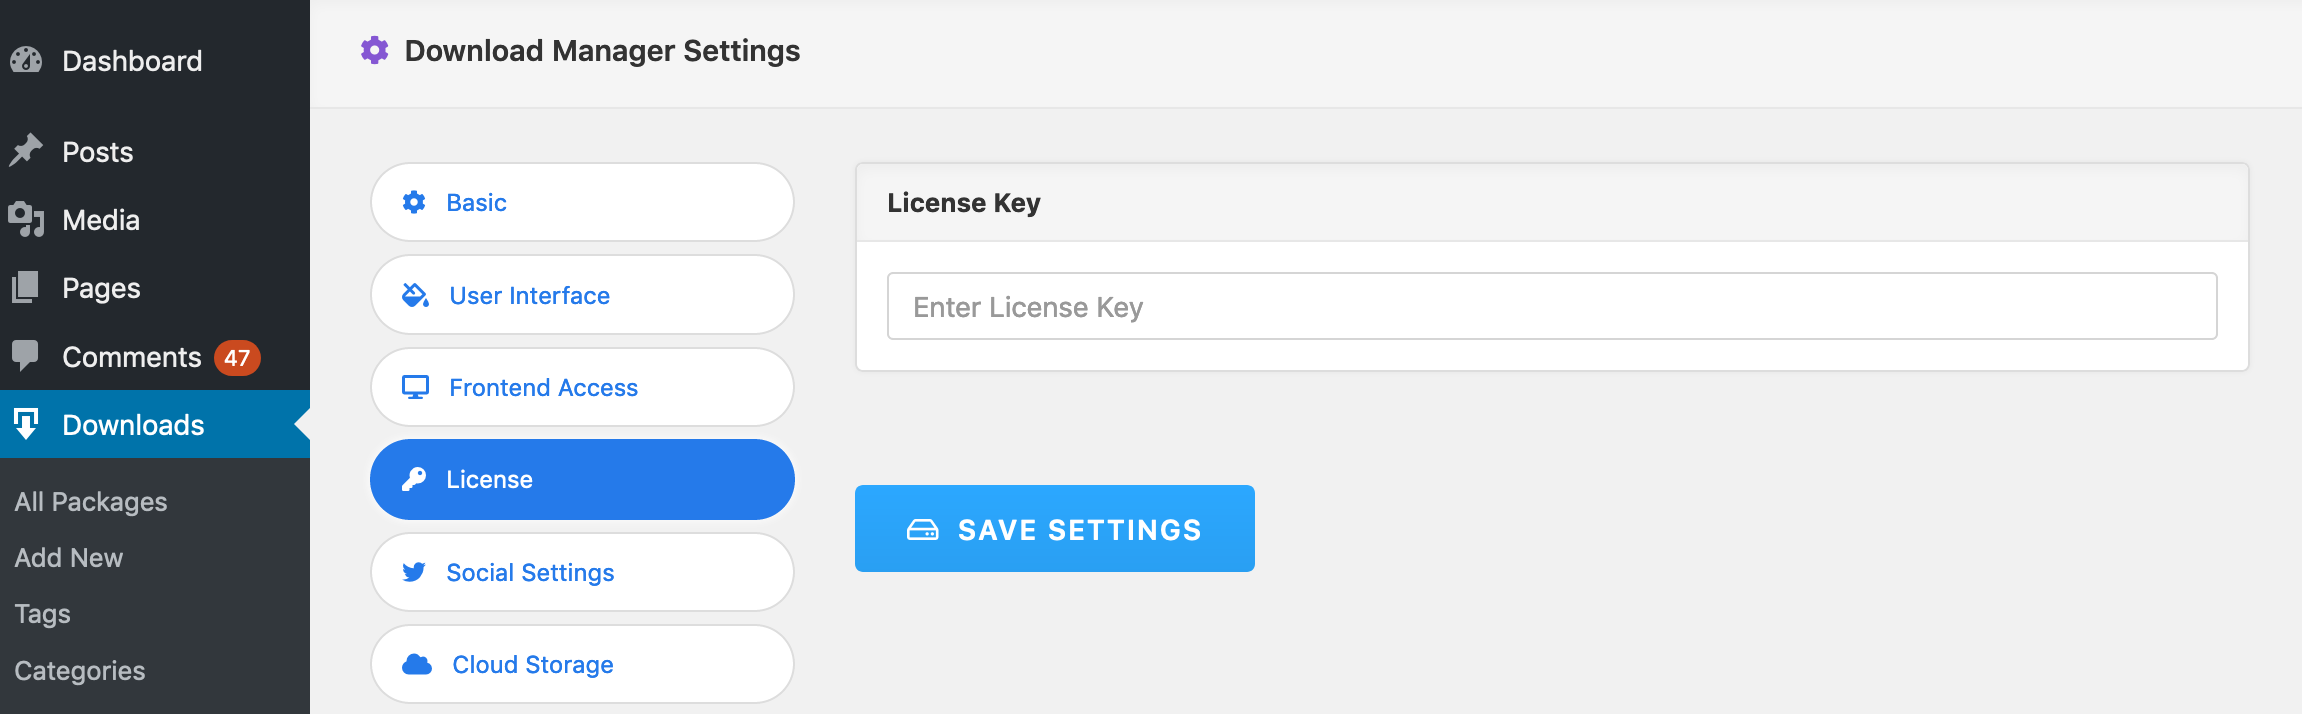 License Key - Download Manager Settings